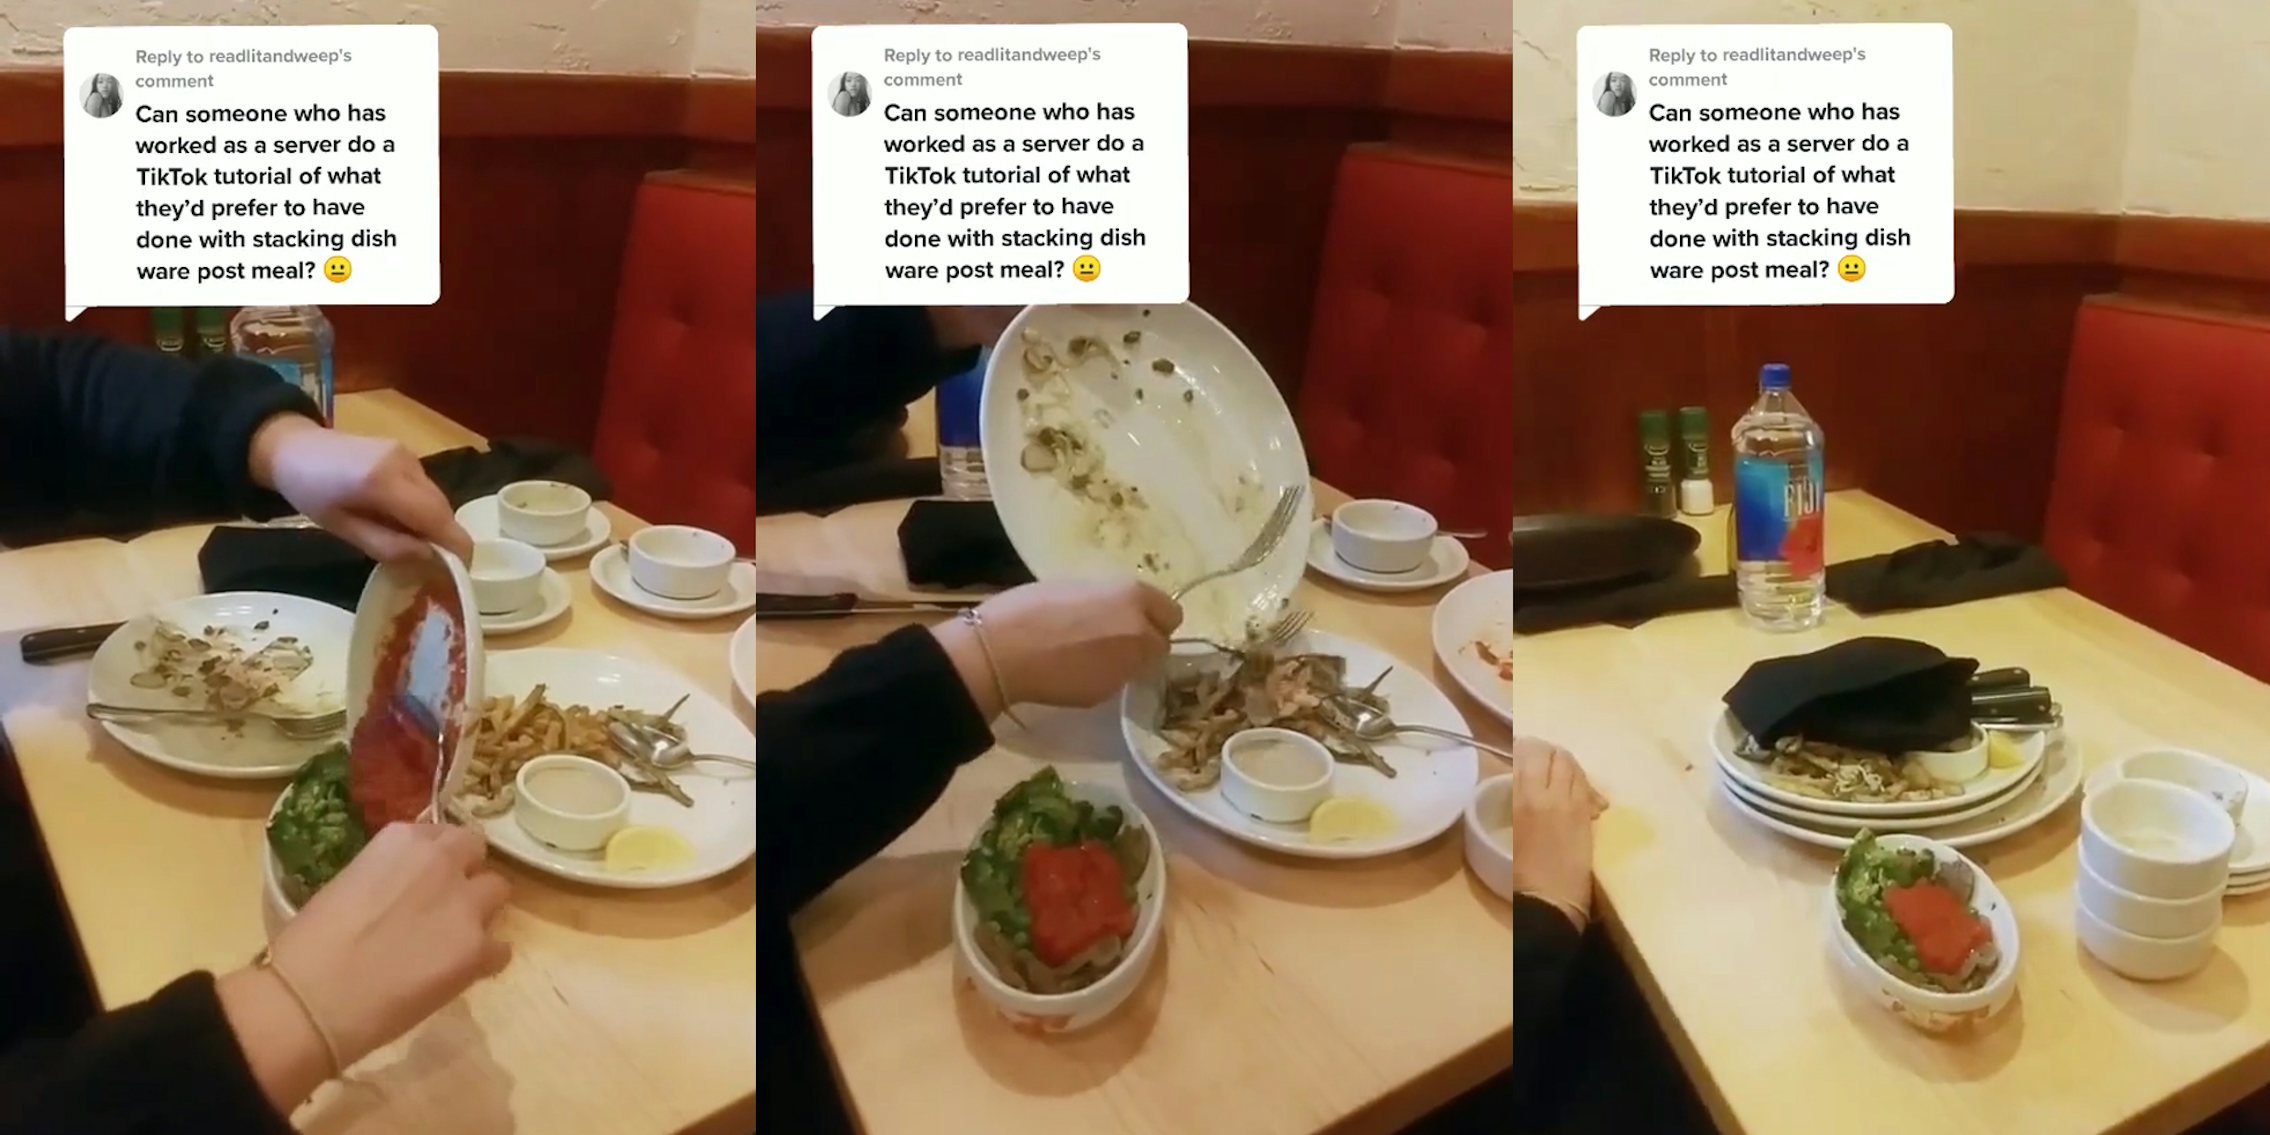 person scraping food from one dish into another at table with caption 'Can someone who has worked as a server do a TikTok tutorial of what they'd prefer to have done with stacking dish ware post meal?' (l) person scraping food from one dish into another at table with caption 'Can someone who has worked as a server do a TikTok tutorial of what they'd prefer to have done with stacking dish ware post meal?' (c) post meal dishes stacked neatly at table with caption 'Can someone who has worked as a server do a TikTok tutorial of what they'd prefer to have done with stacking dish ware post meal?' (r)